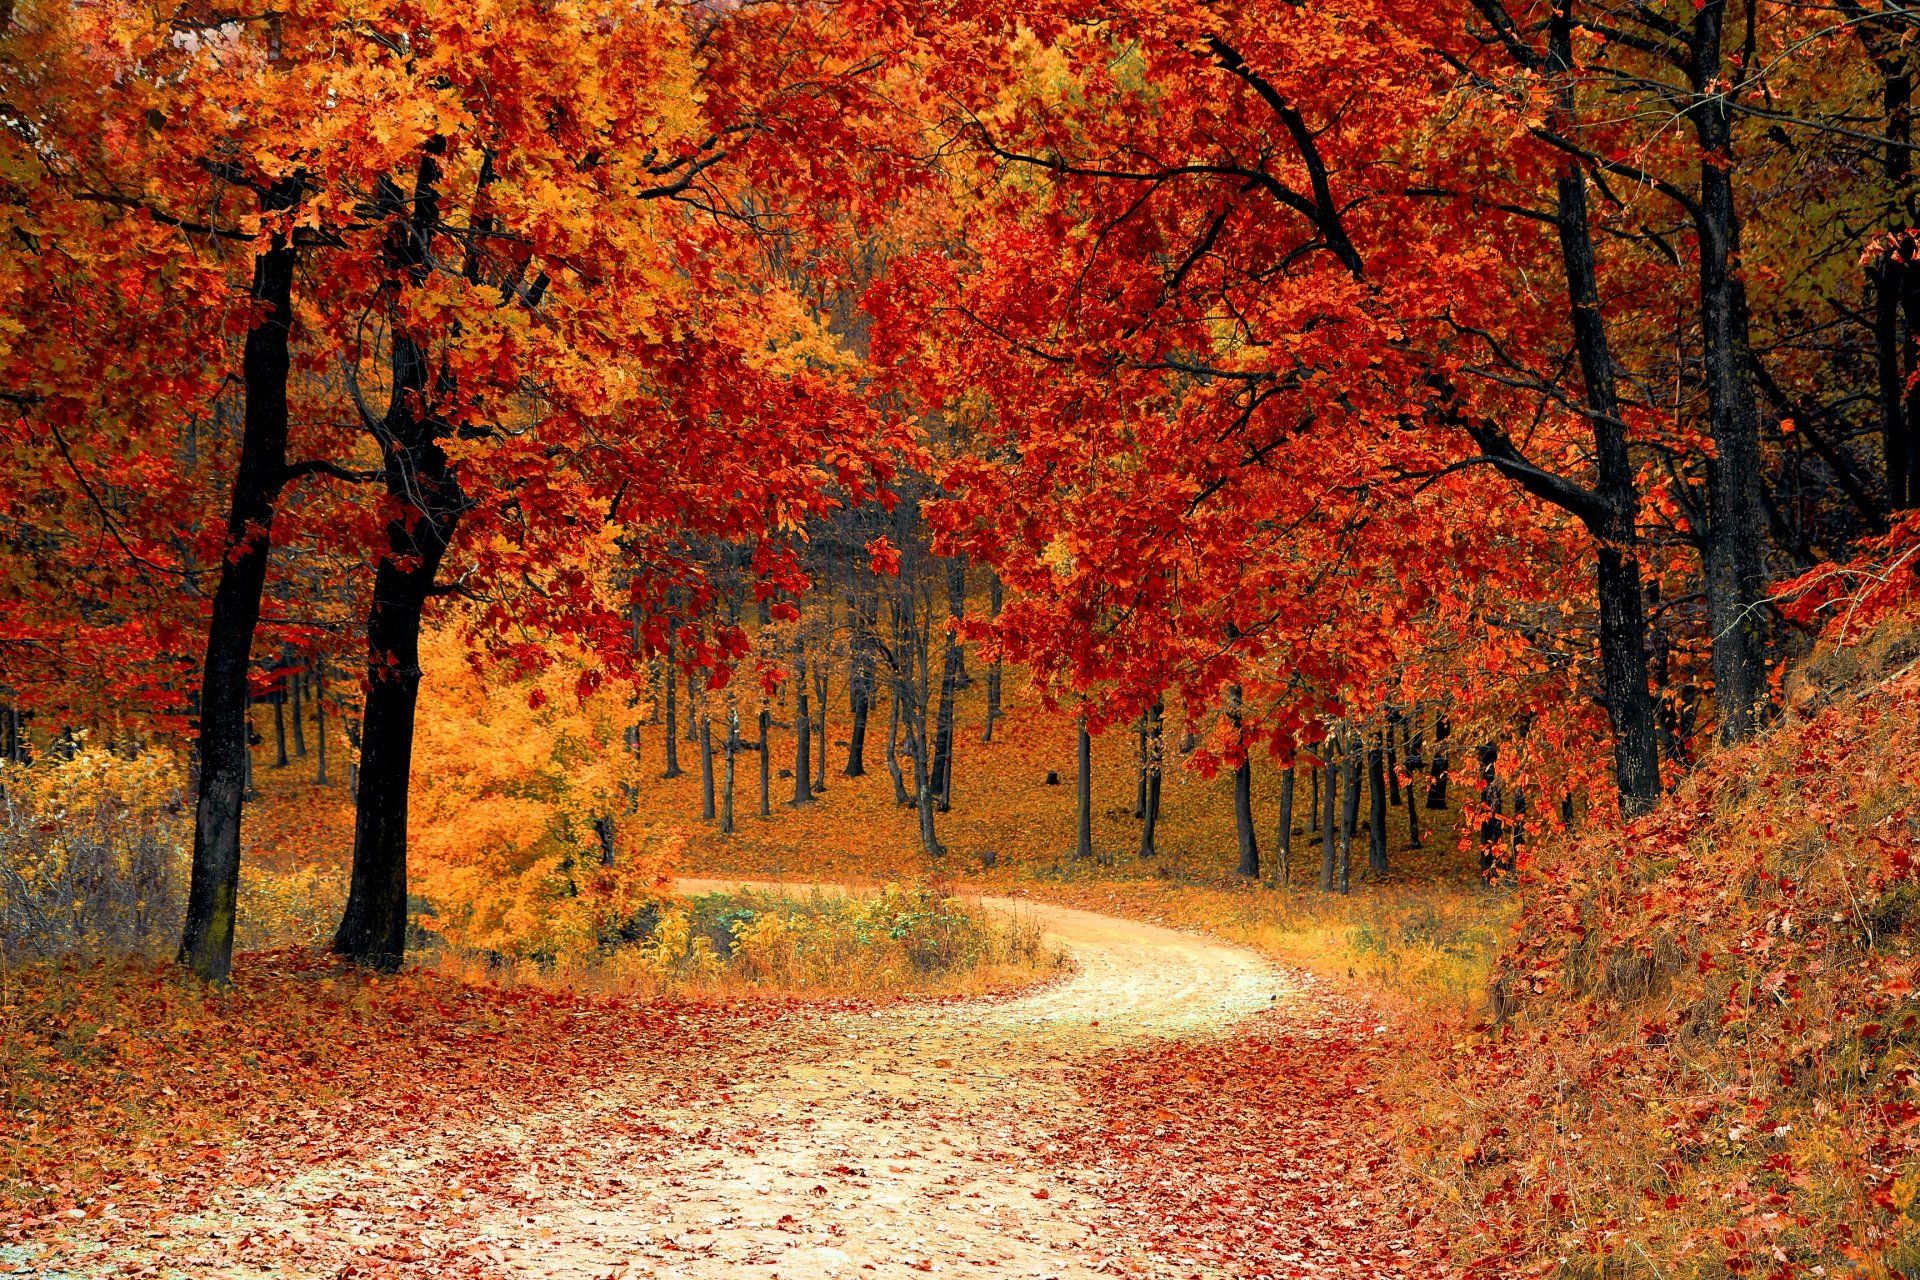 A dirt road in the middle of a forest covered in leaves